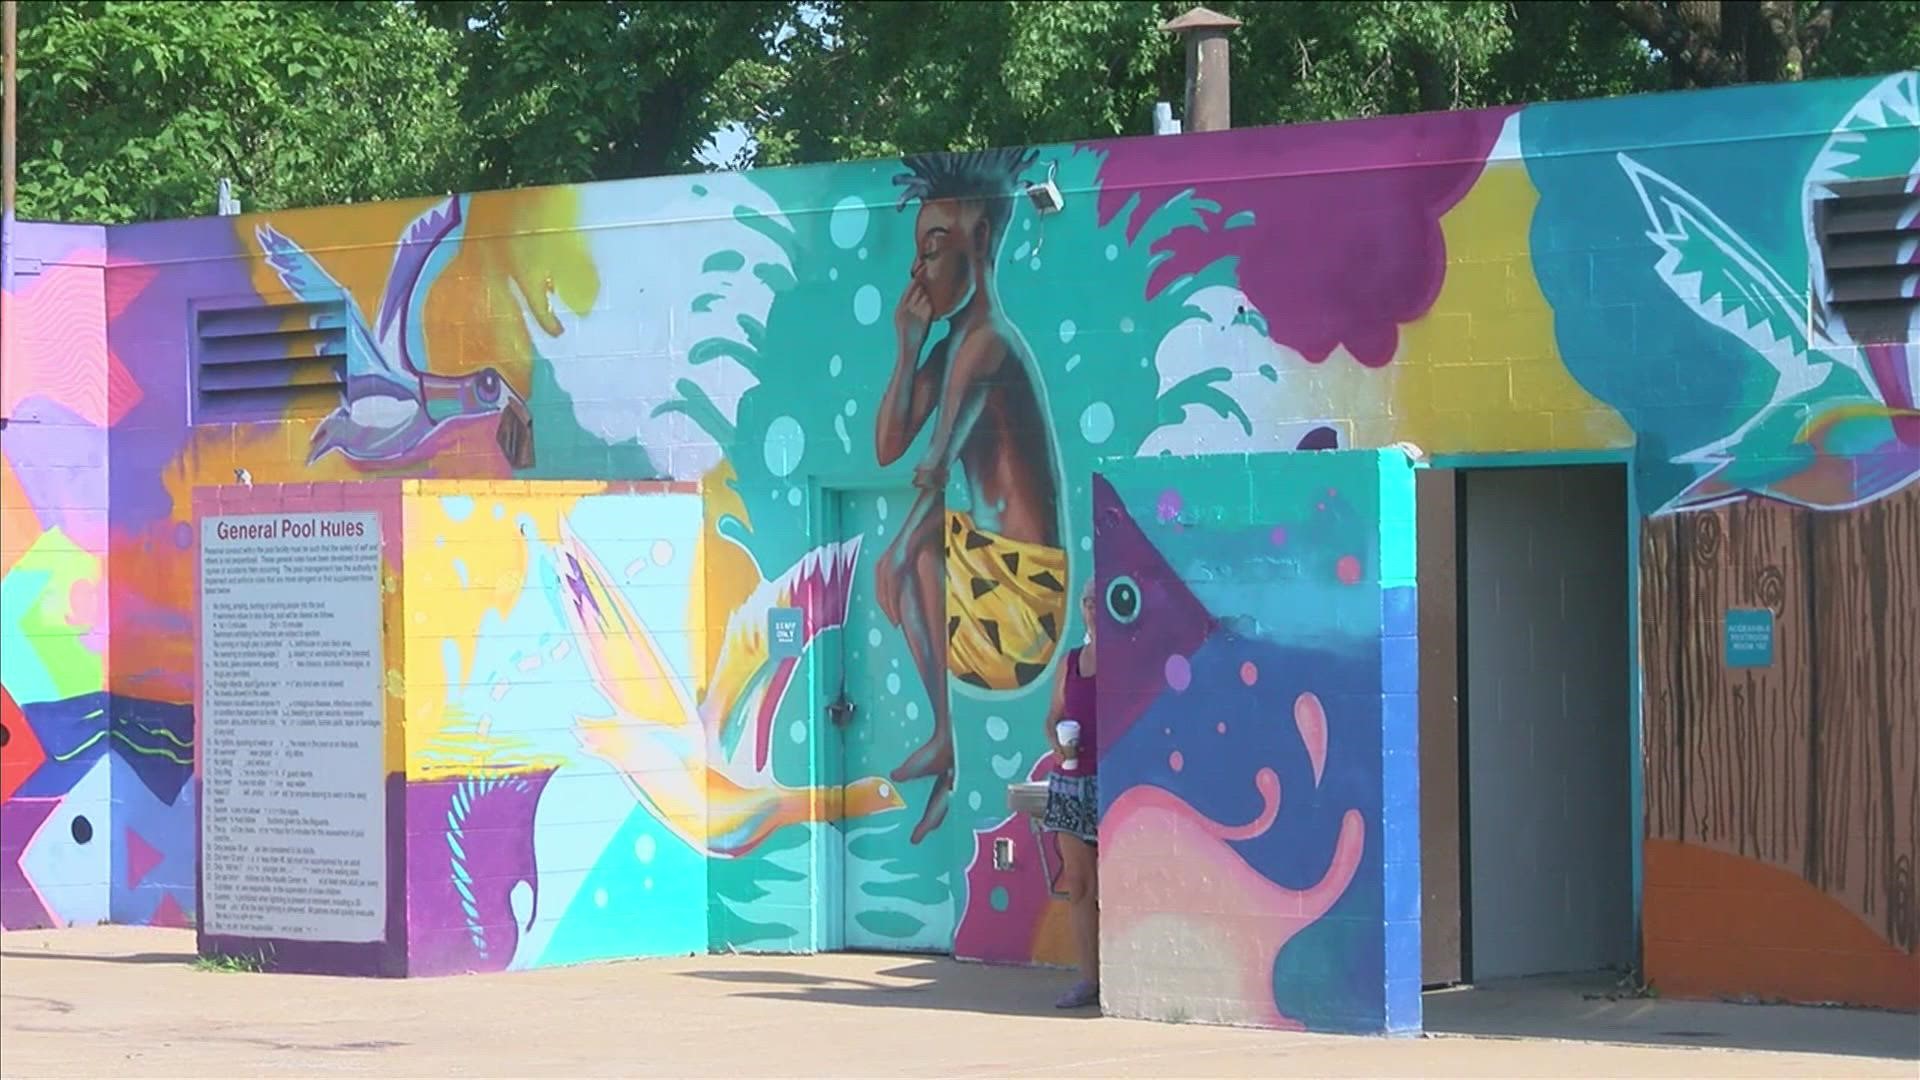 Created by Jamond Bullock, "Slice" was unveiled by UrbanArt Memphis and Memphis Parks as well as the H.U.G. Neighborhood Park and Friends.